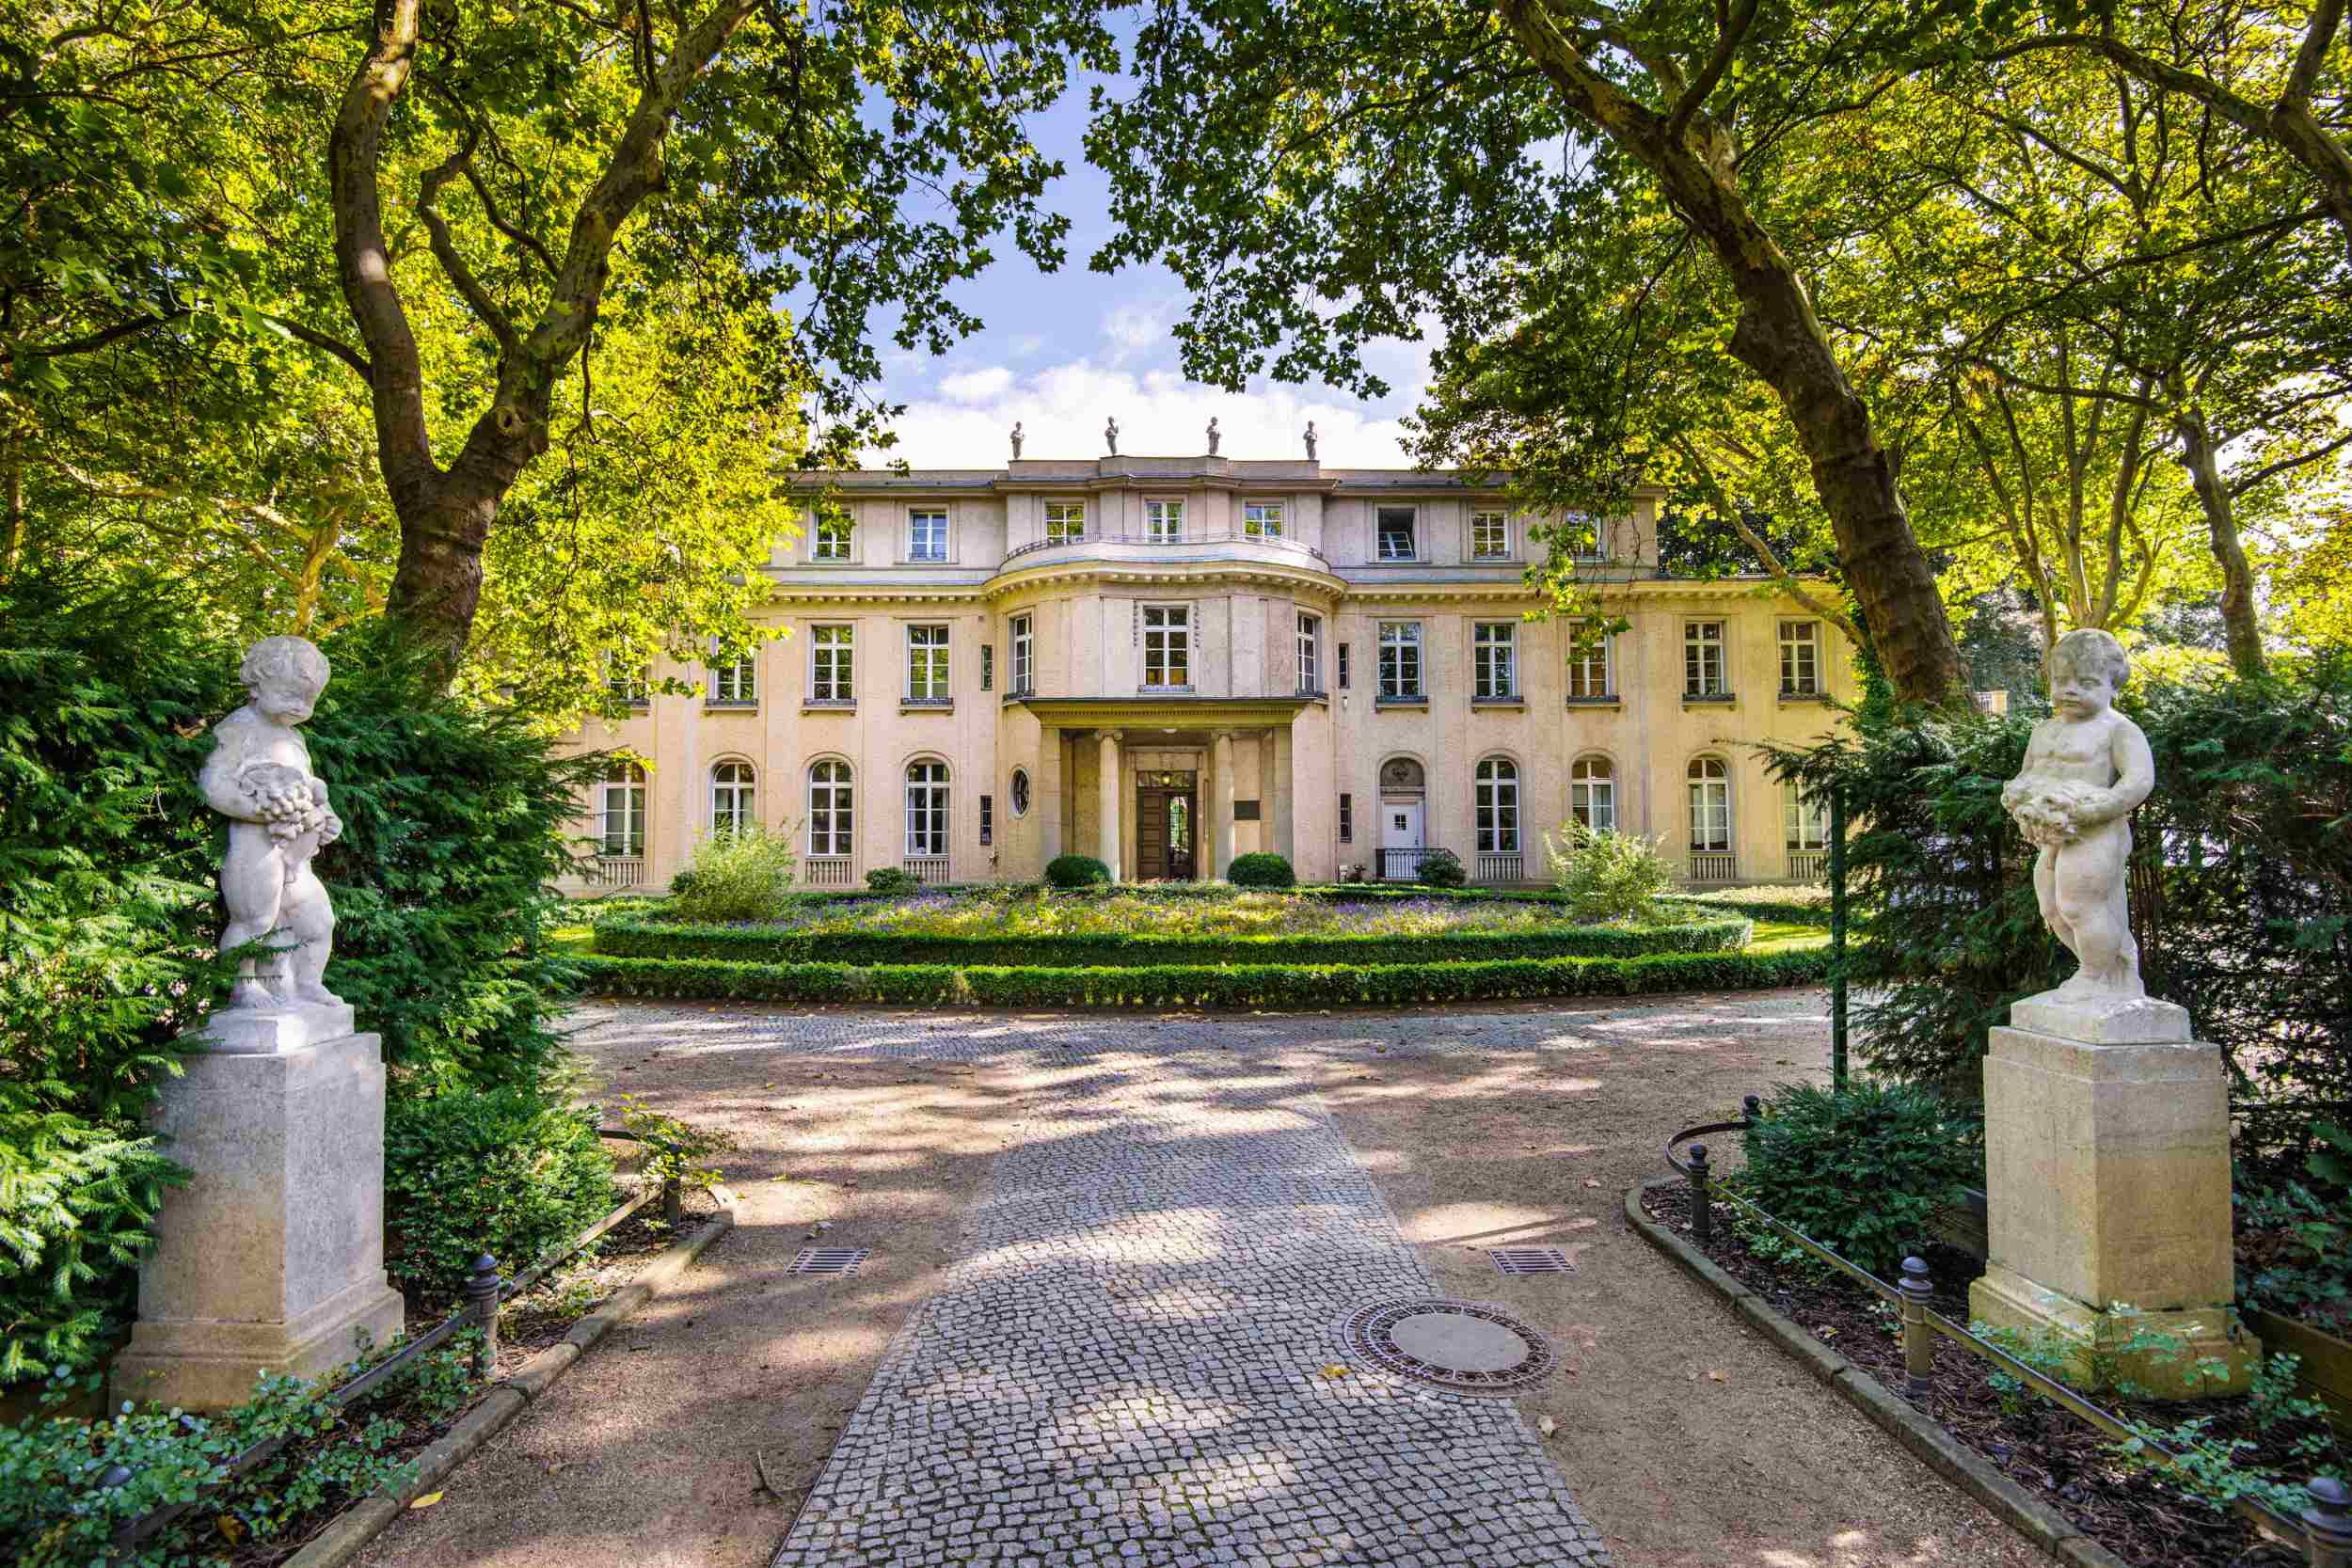 House of The Wannsee Conference